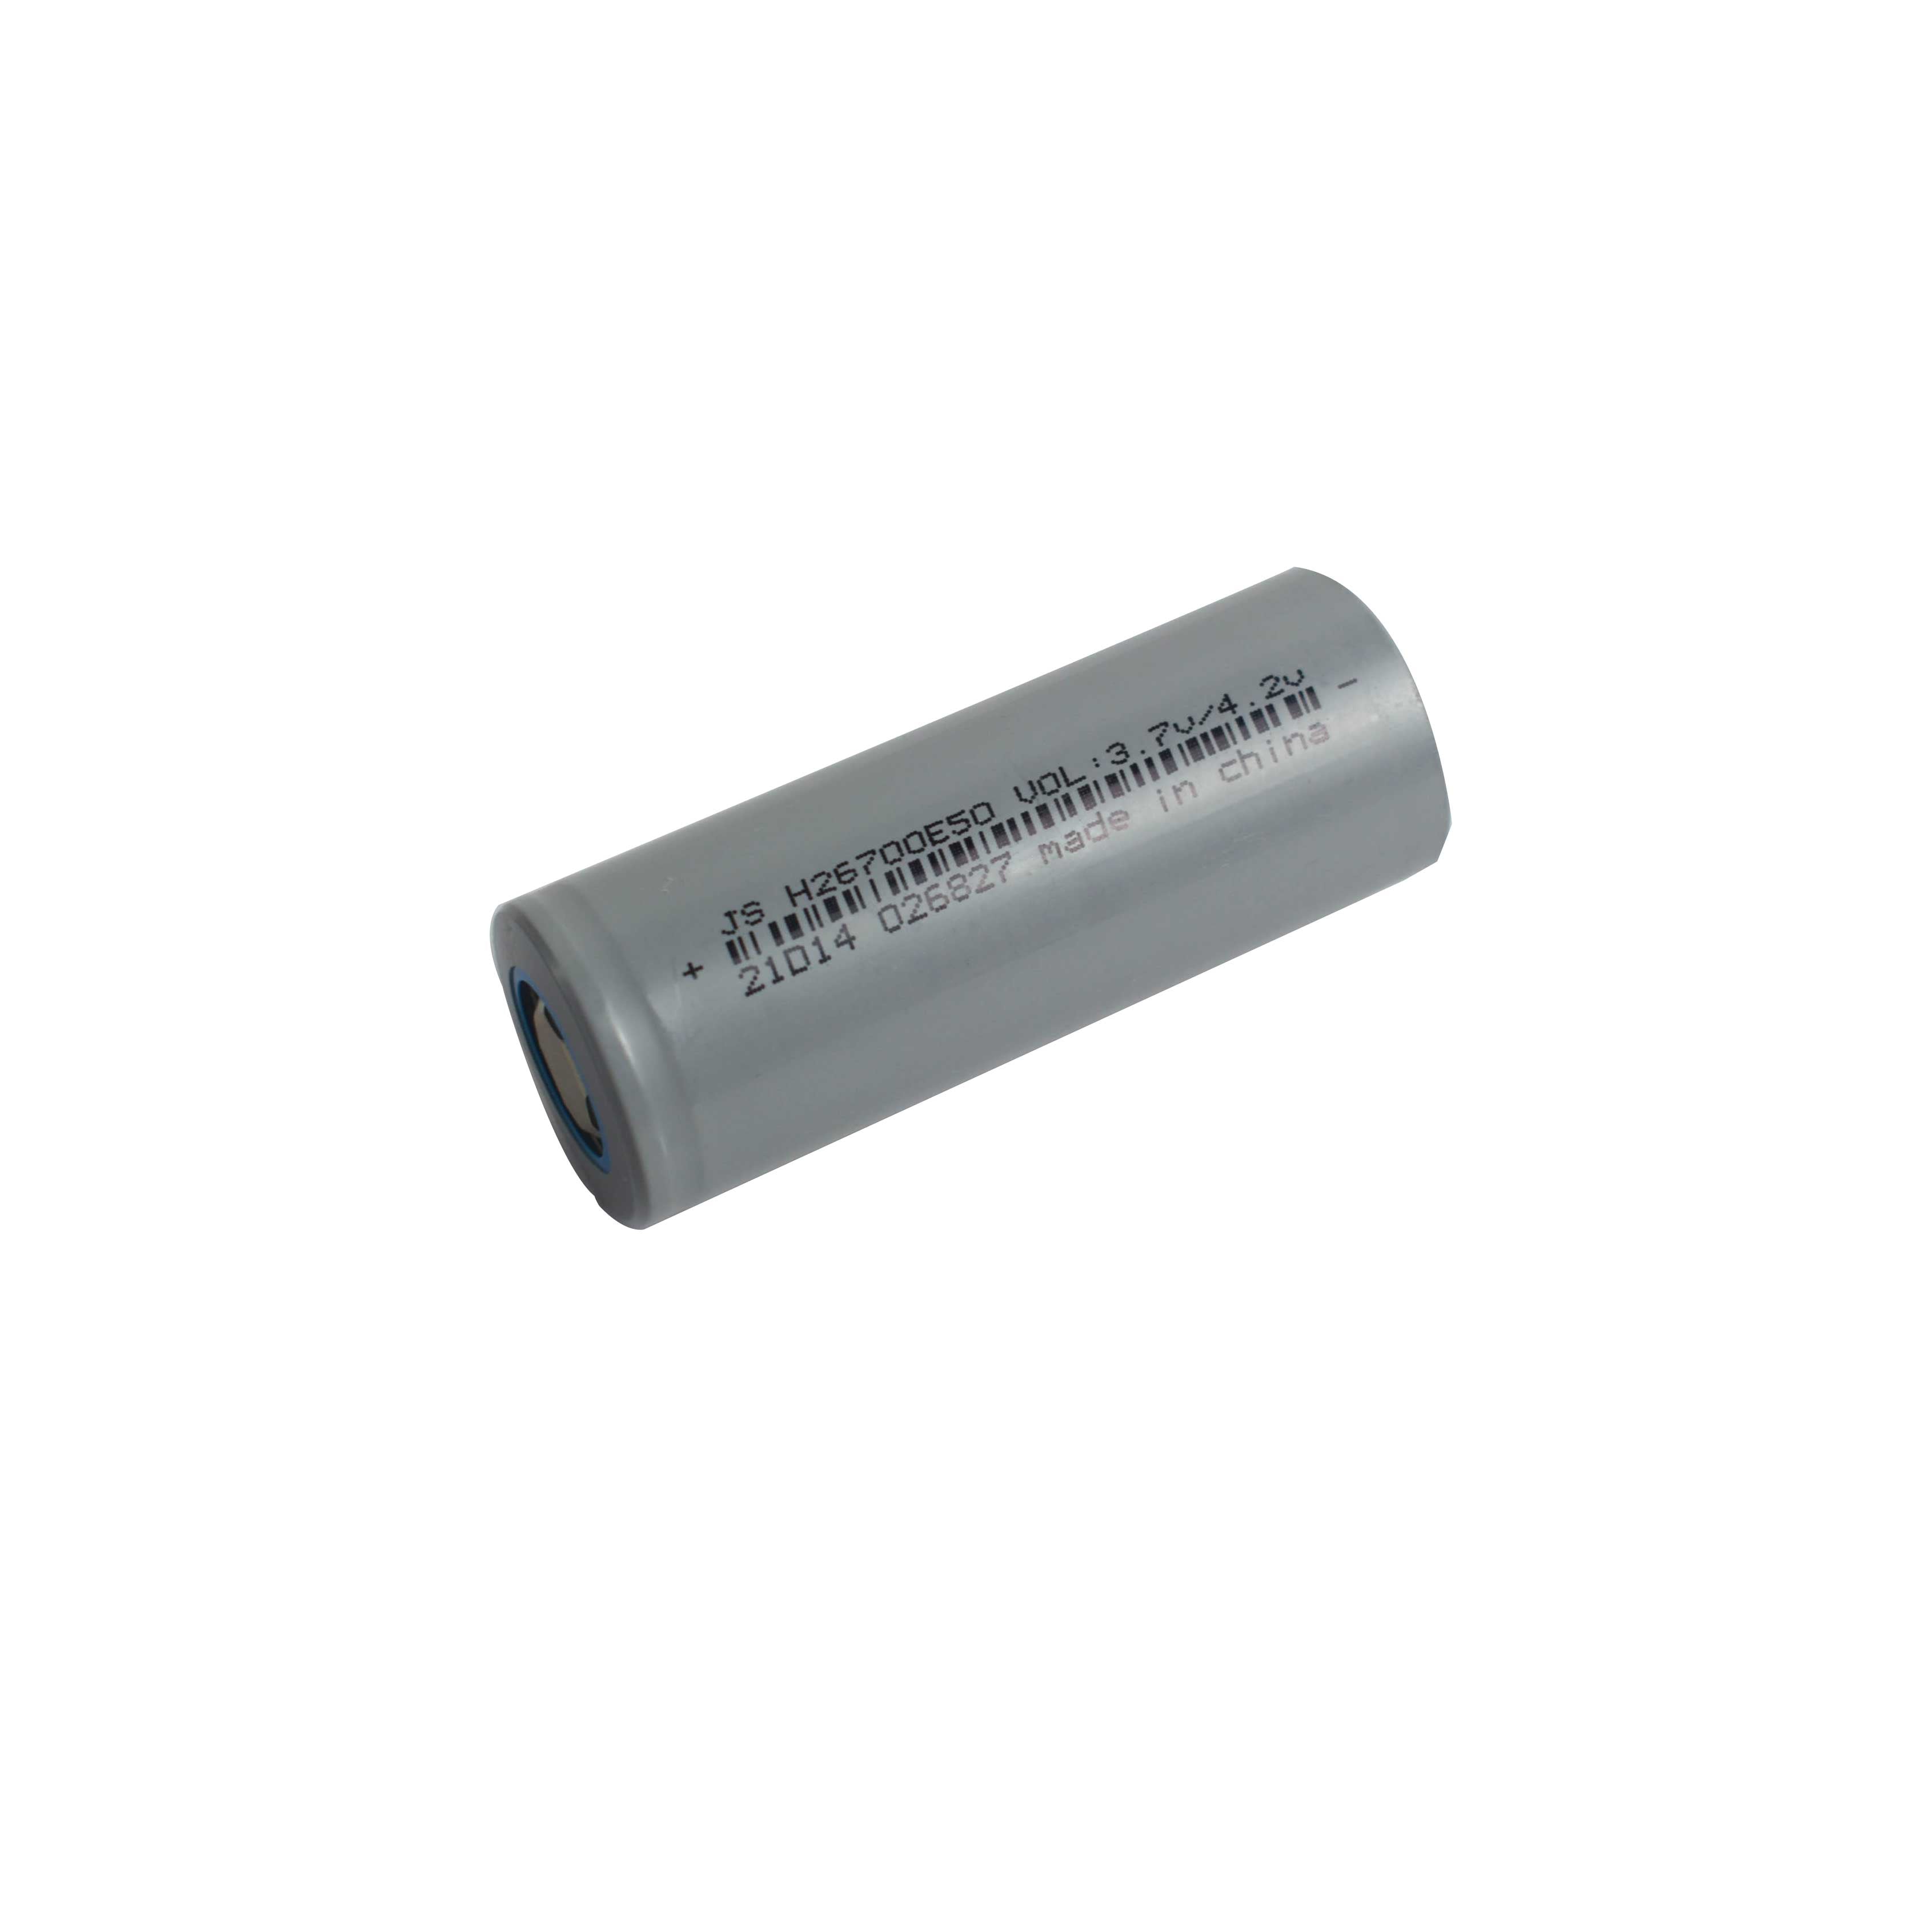 Buy 3.7V 5000mAh 26700 Lithium Ion 3C Rechargeable Battery at